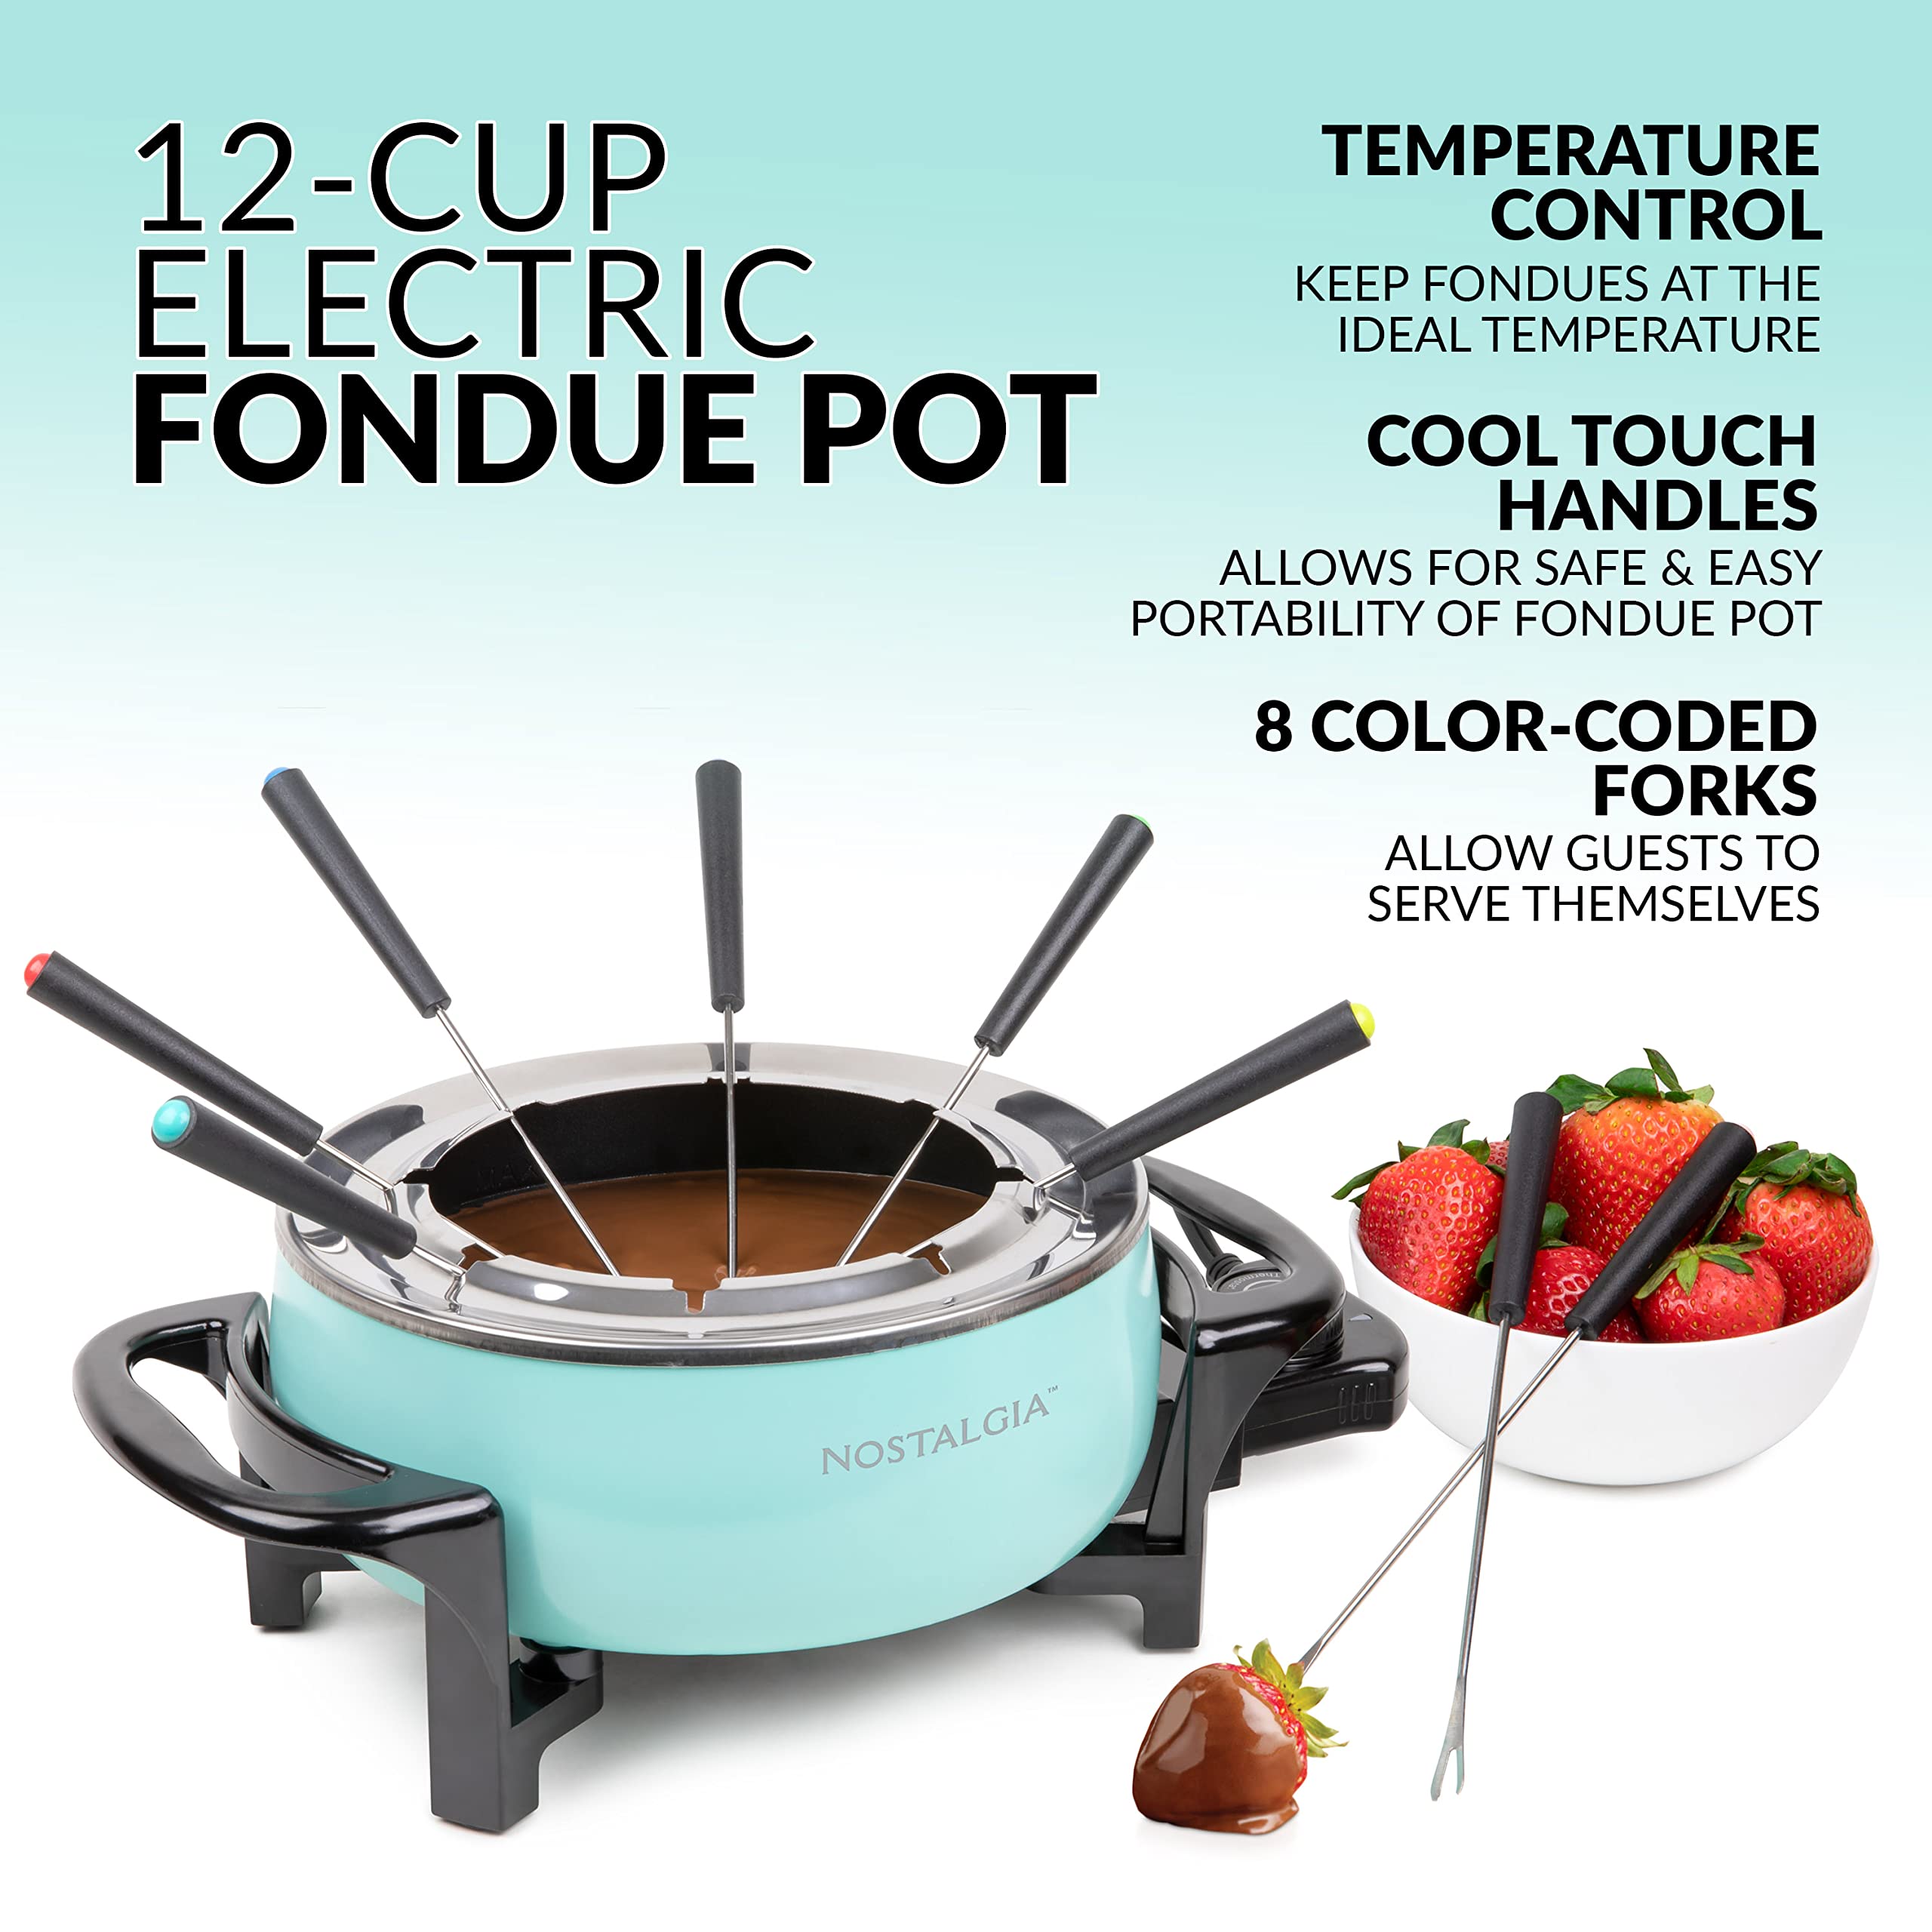 Nostalgia 12-Cup Electric Fondue Pot Set for Cheese & Chocolate - 8 Color-Coded Forks, Adjustable Temperature Control - Stylish Serving for Hors d'Oeuvres, Entrees, and Desserts - Aqua